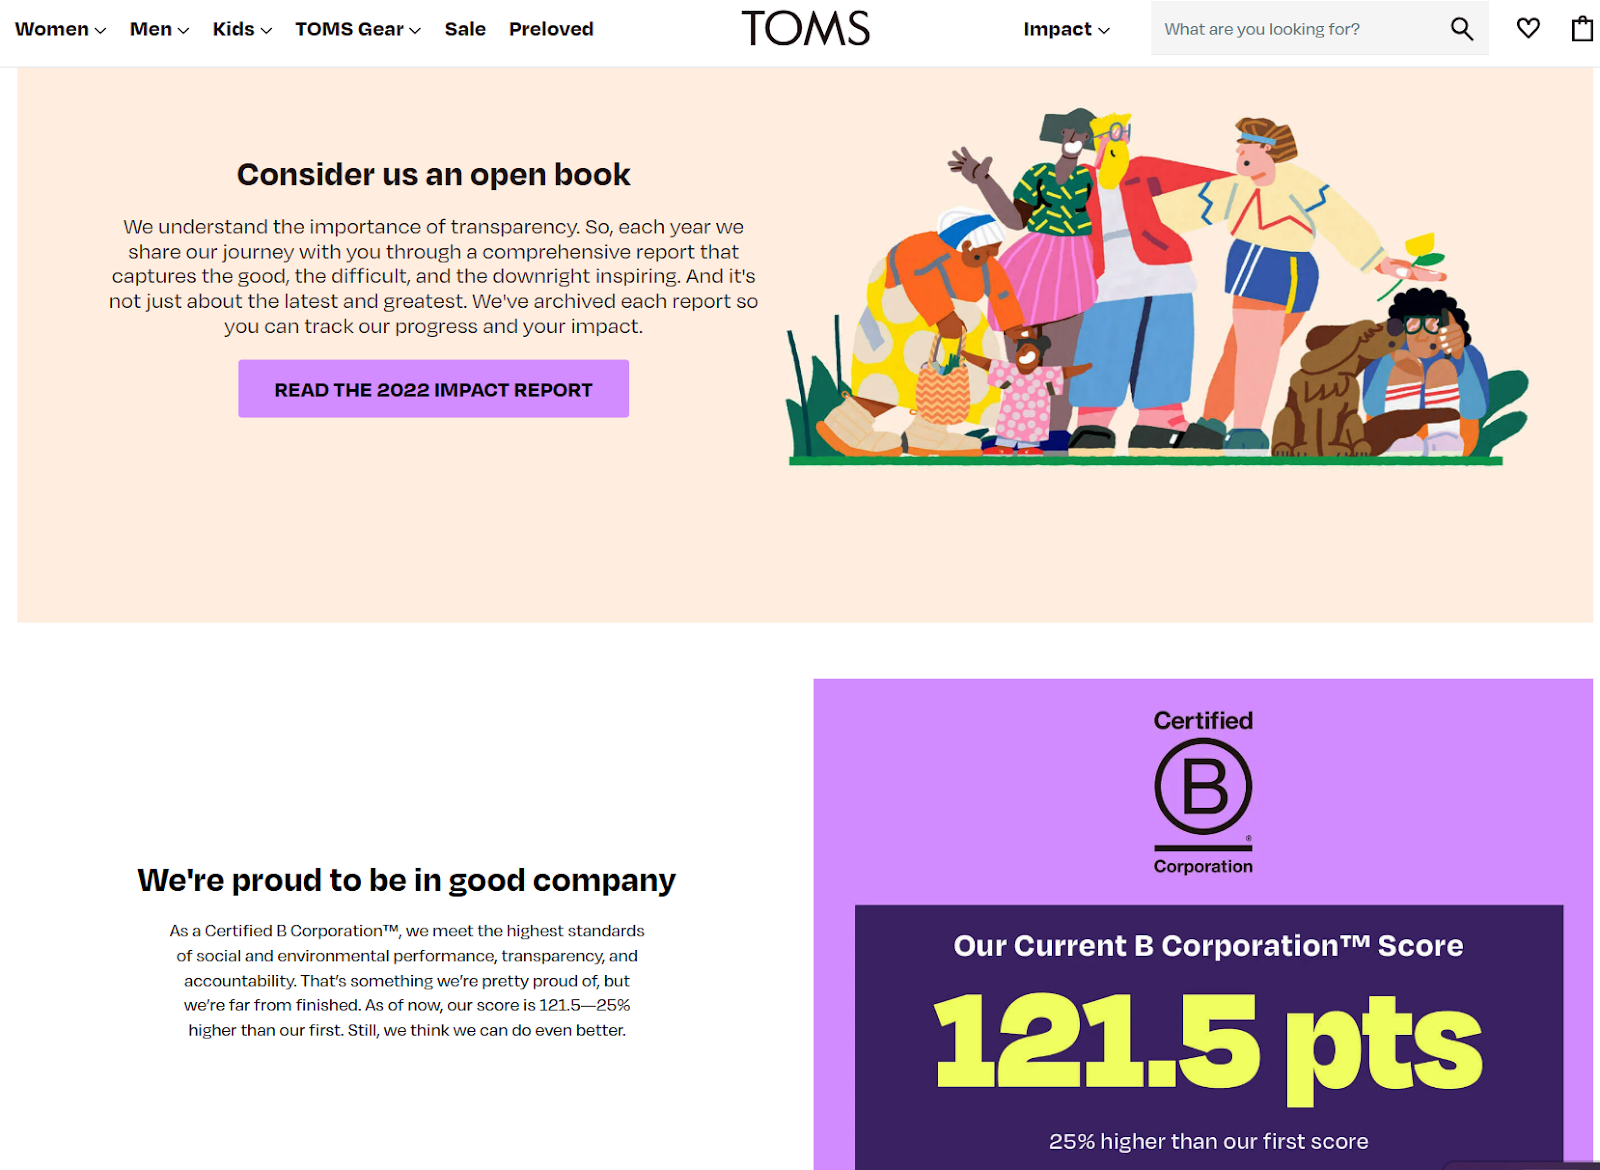 TOMS' About Us page
